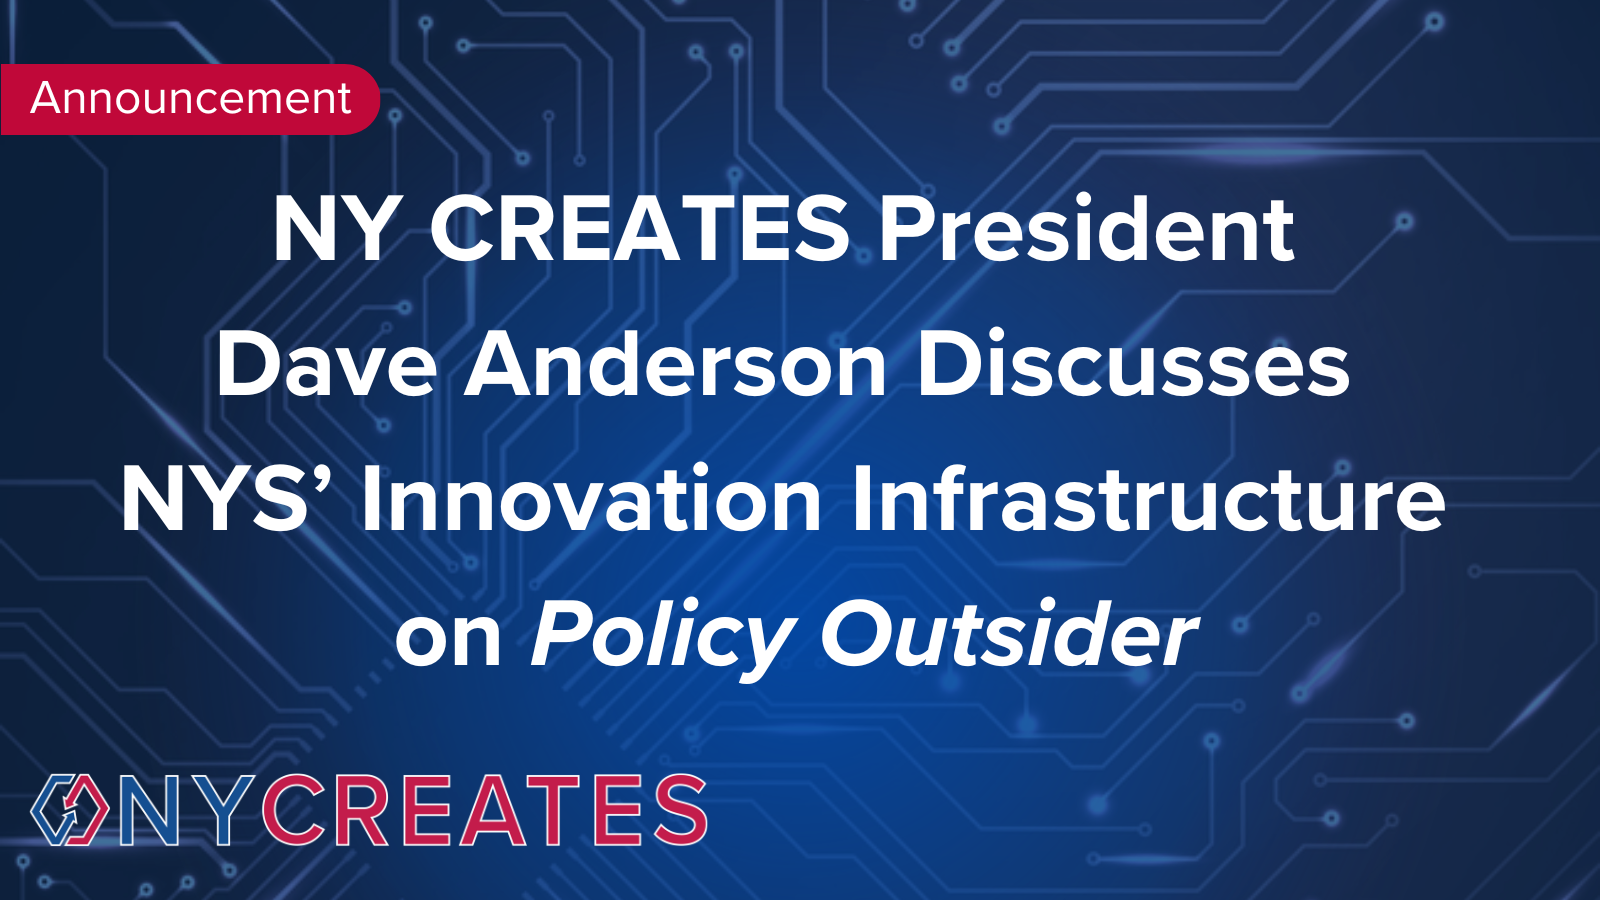 NY CREATES President Dave Anderson Discusses NYS' Innovation Infrastructure on Policy Outsider